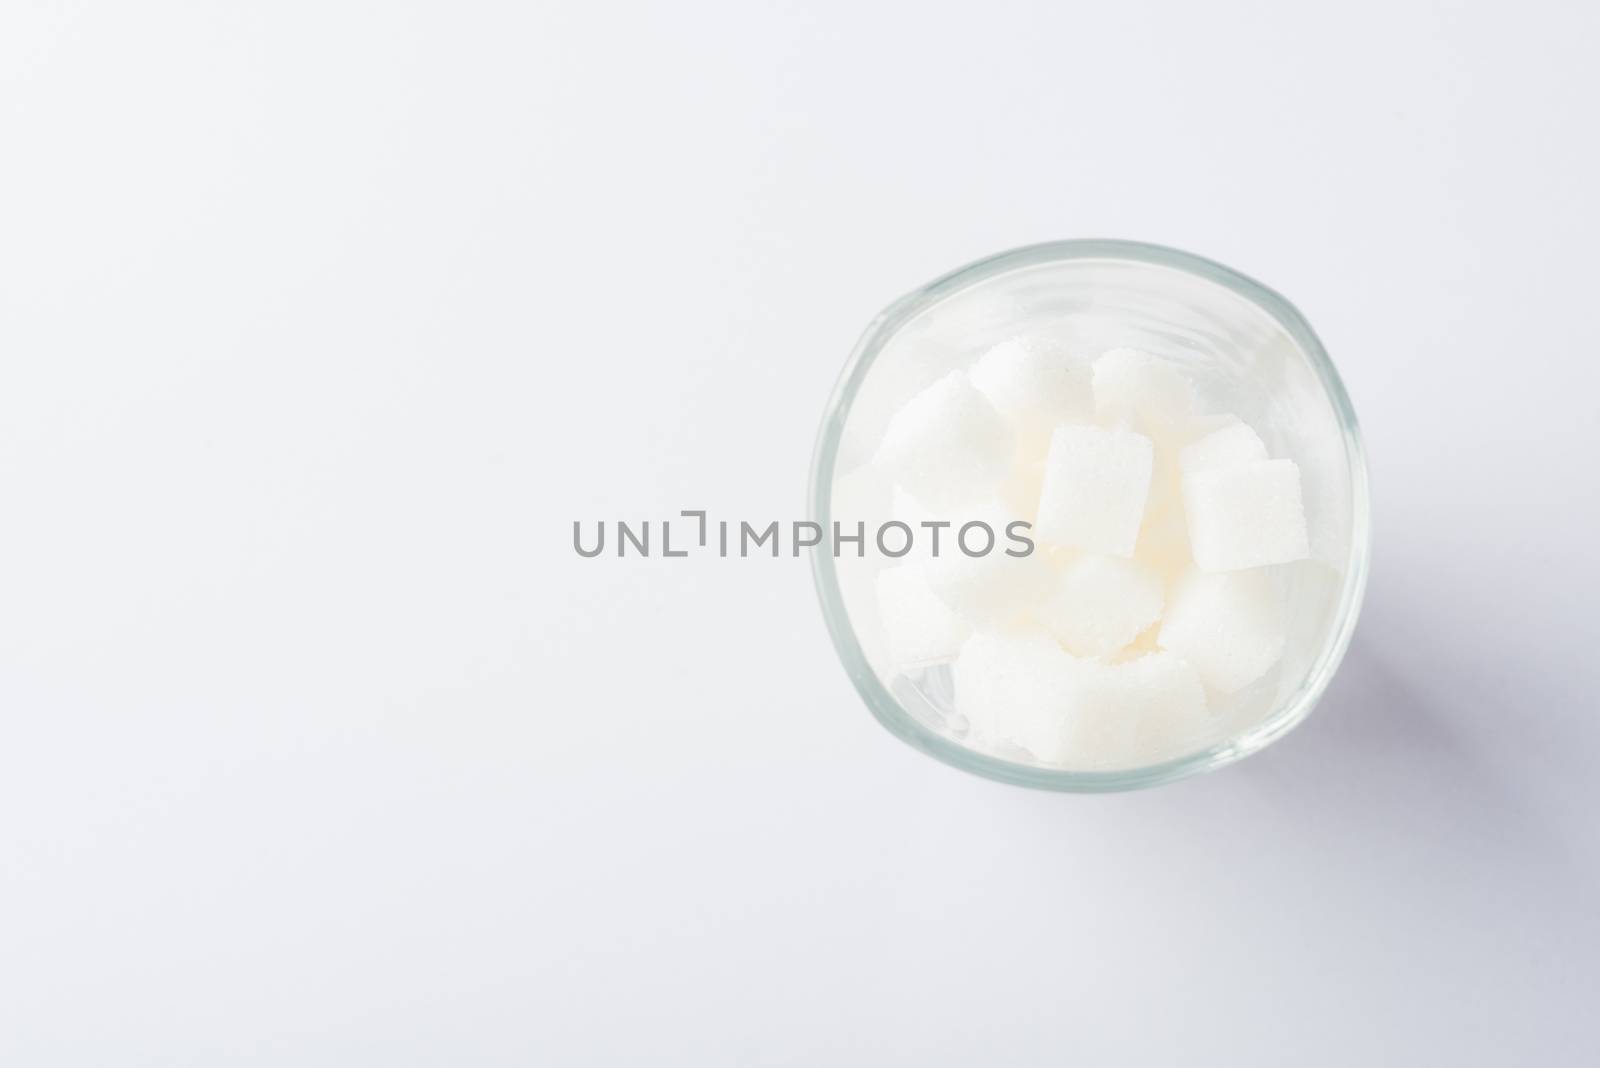 Top view glass full of white sugar cube sweet food ingredient, studio shot isolated on white background, health high blood risk of diabetes and calorie intake concept and unhealthy drink